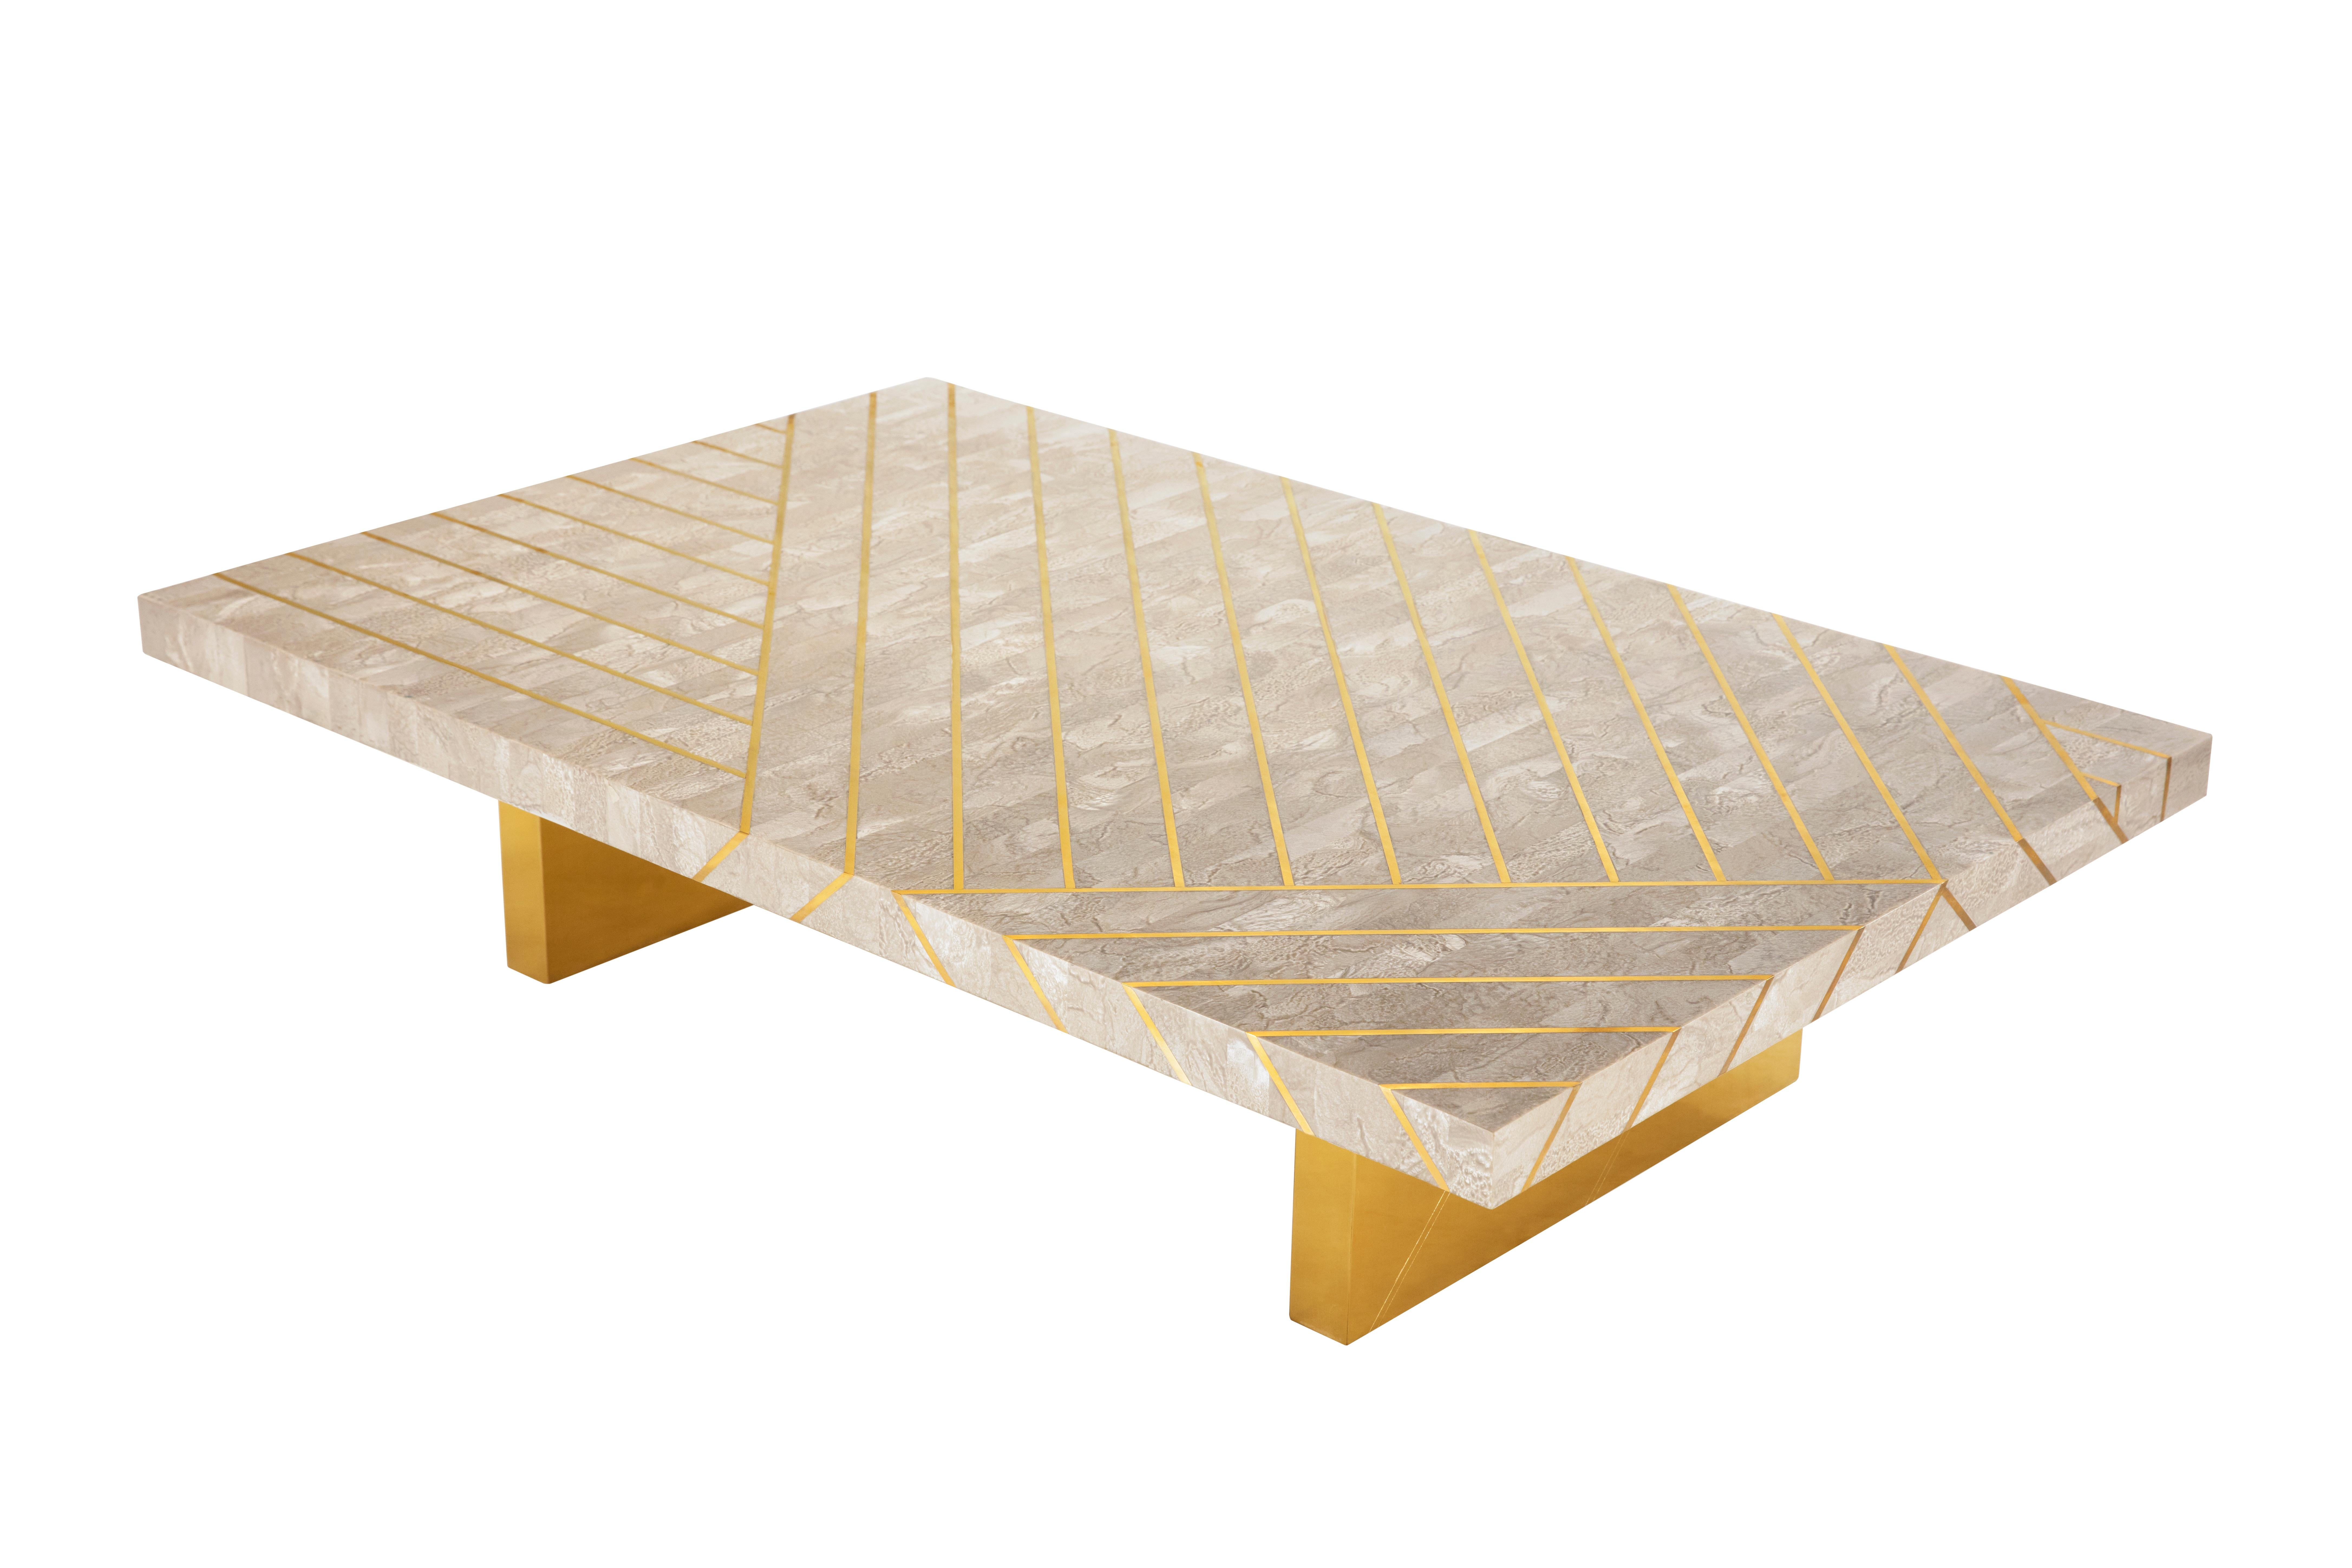 Nesso Beige and Pink Medium Coffee Table with Brass Inlay by Matteo Cibic is a gorgeous coffee table in pearly resin and geometric brass inlay. Custom sizes are available on request. It comes in three colors - Beige, gray and Mint.

Awarded designer